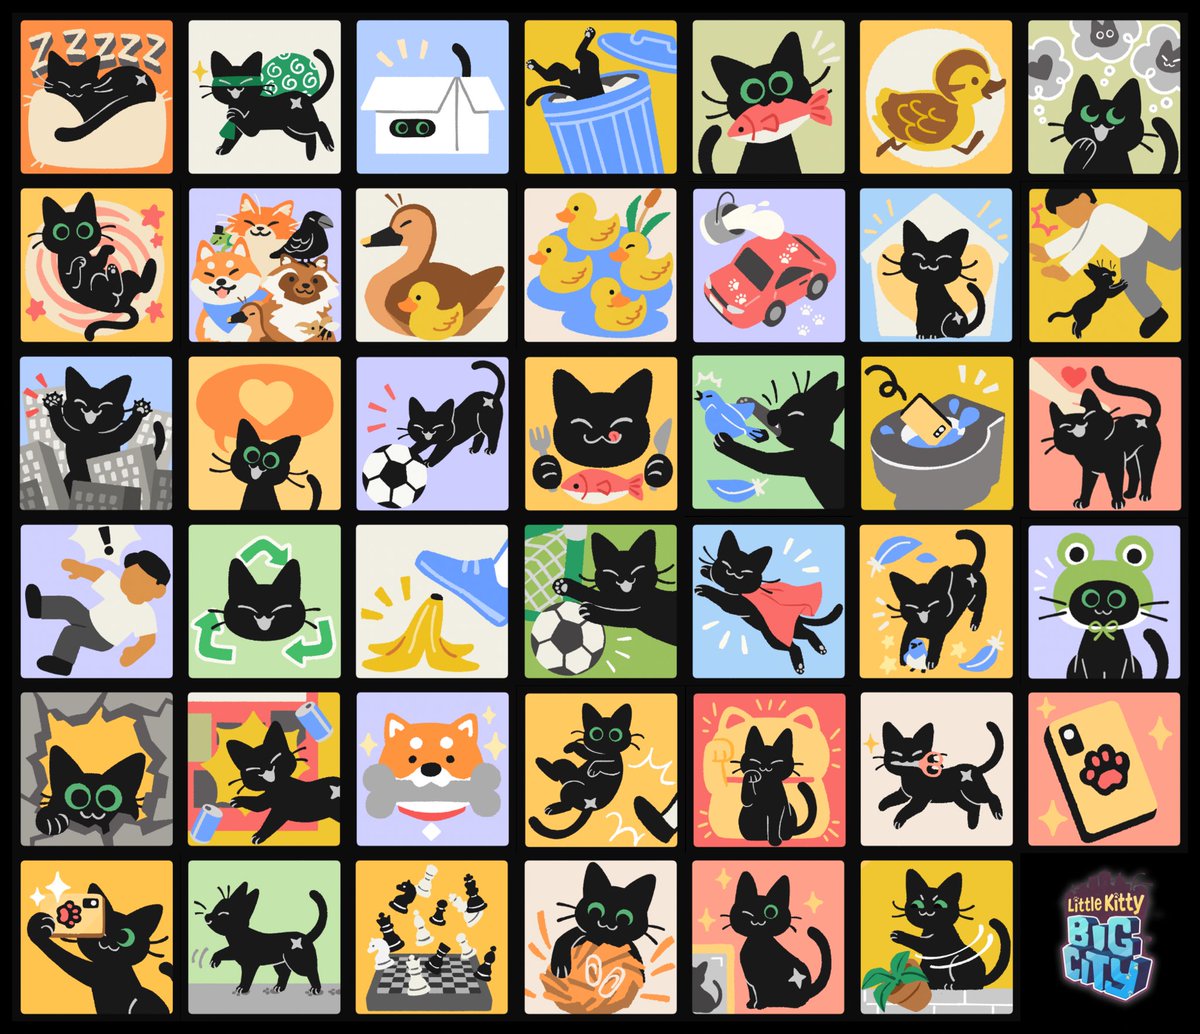 all the achievement icons I drew for @LittleKittyGame!! out now on switch, xbox and steam 🥳🐈‍⬛